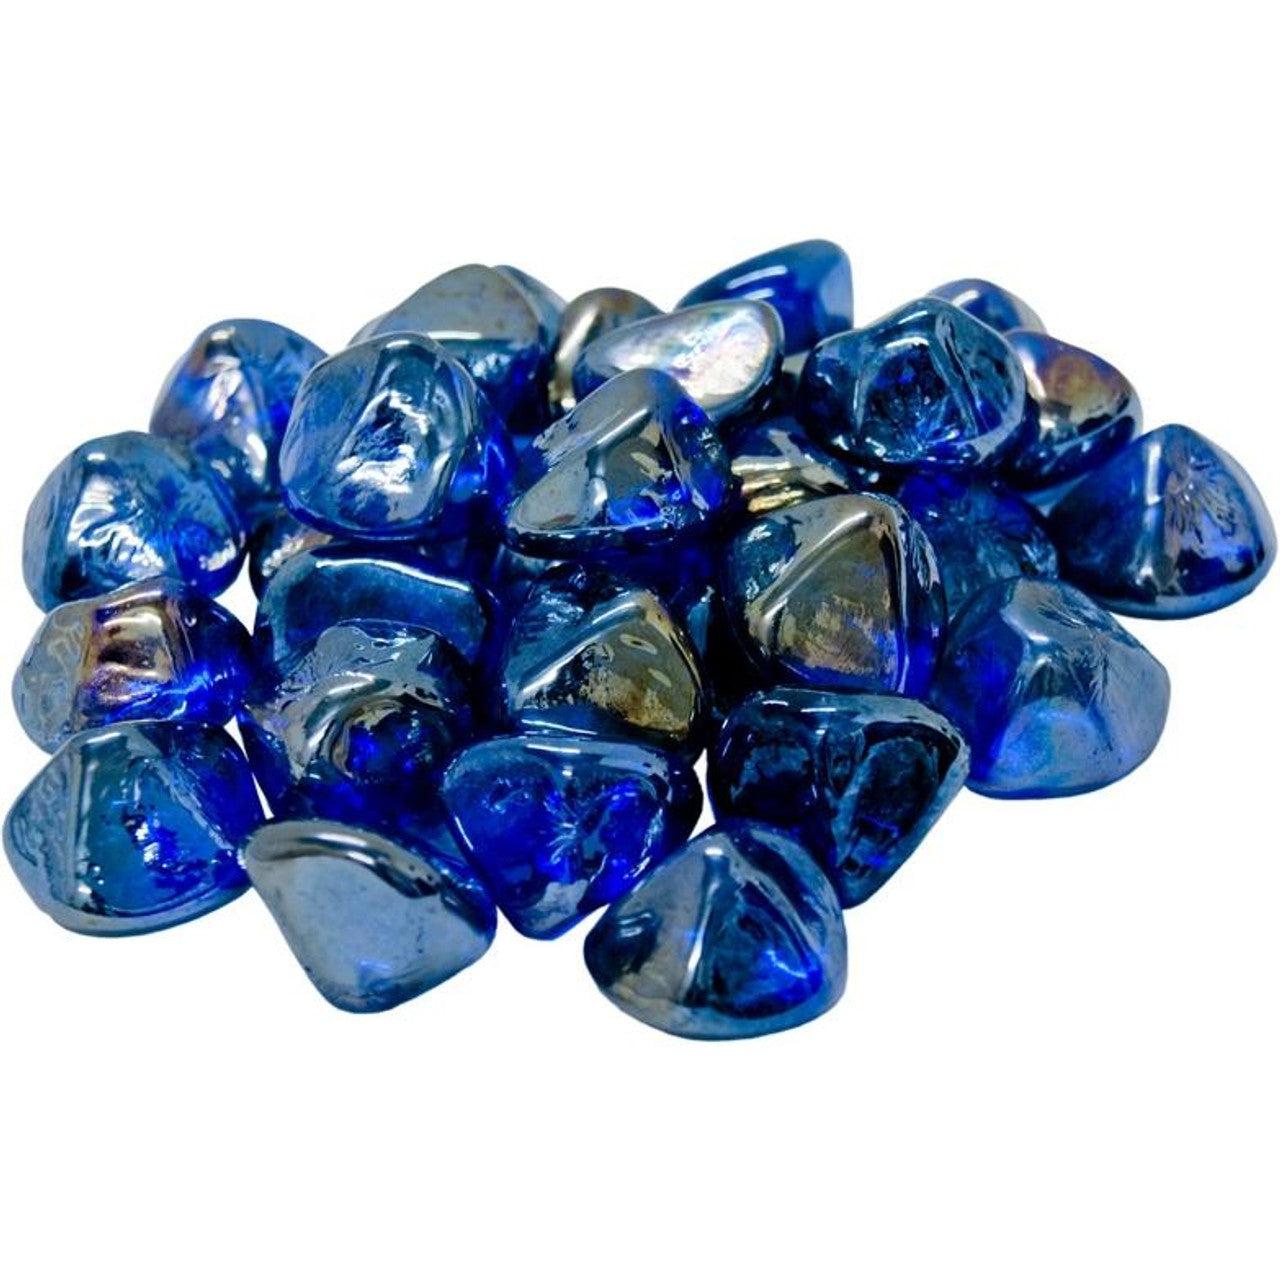 50 lb. Package of Diamond Nuggets Glass Media